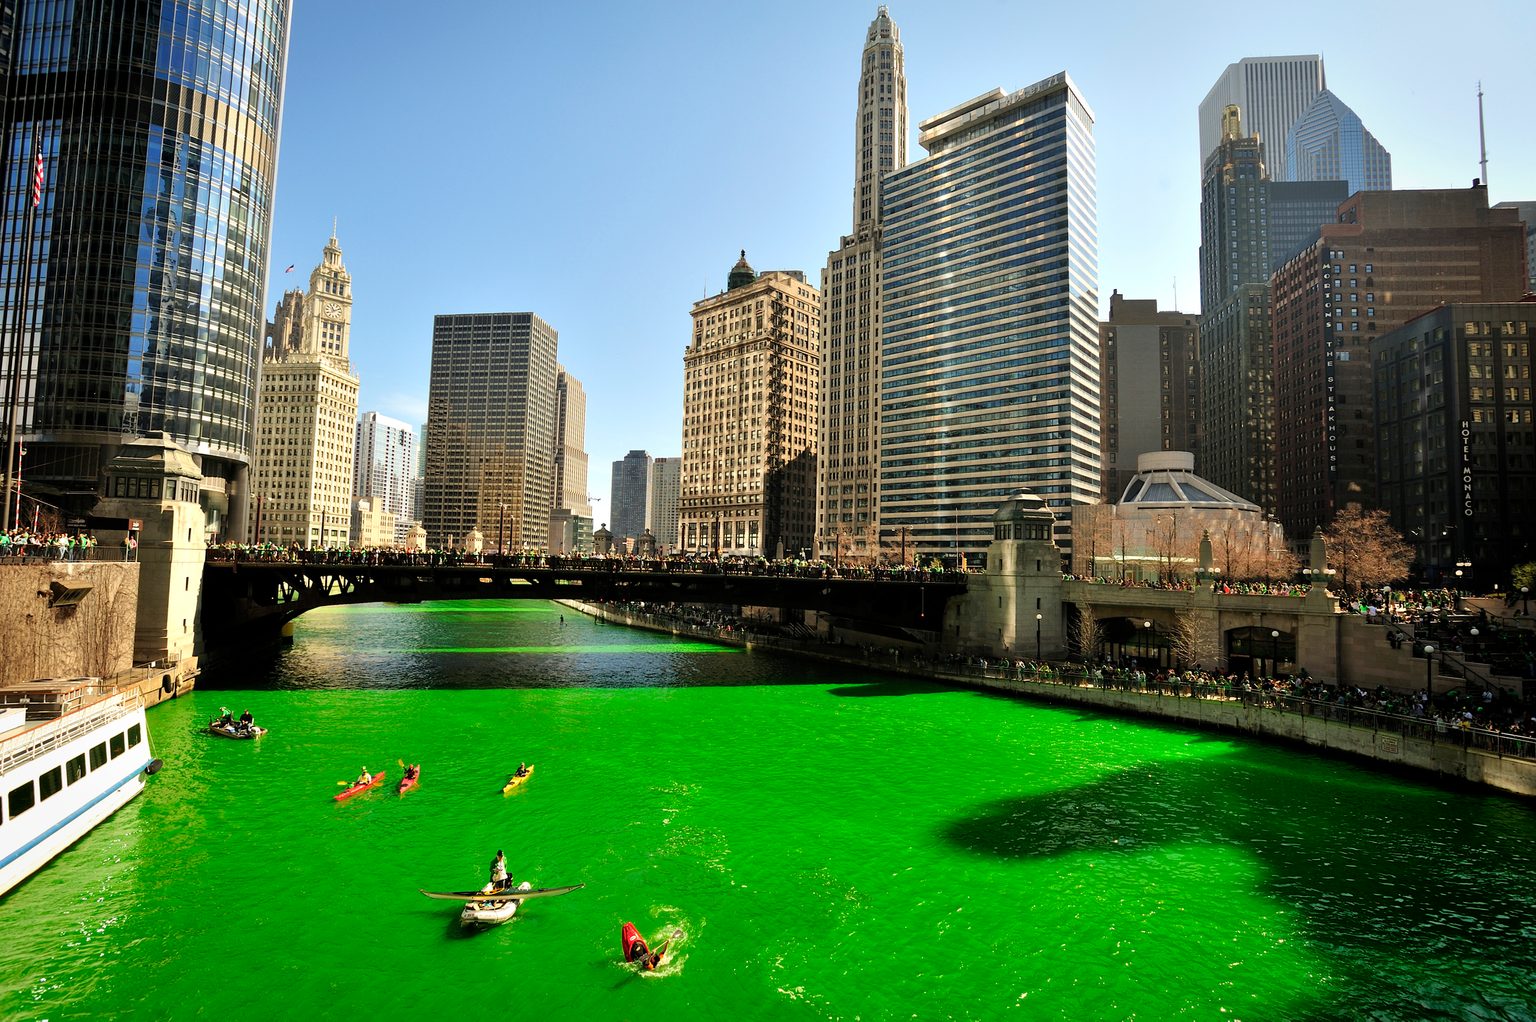 Chicago Green River The History Behind This St. Patrick's Day Tradition